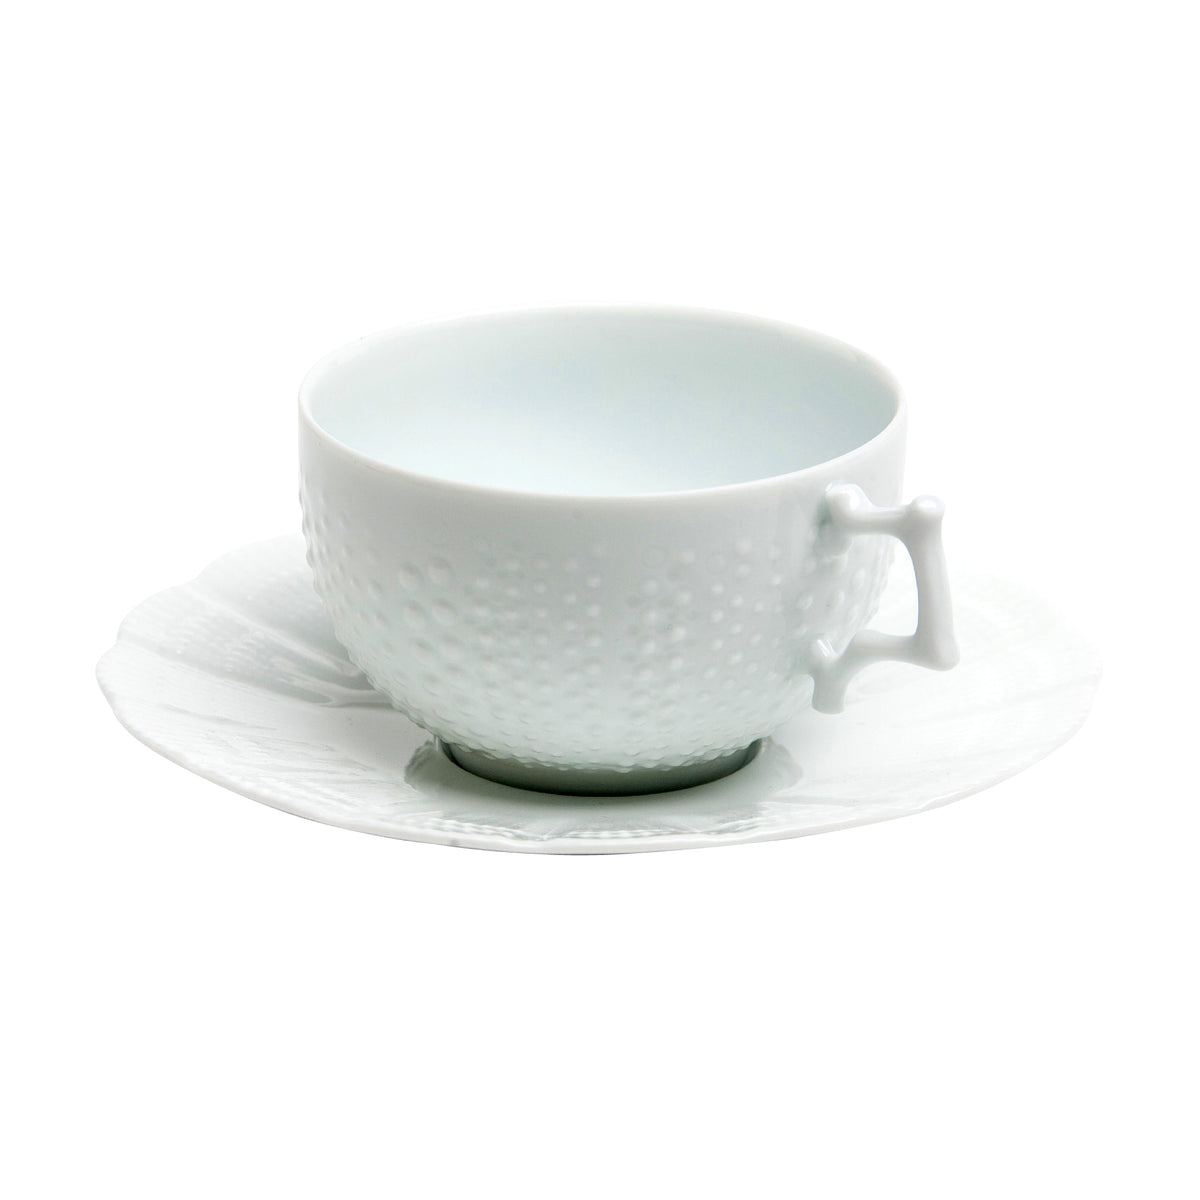 Corail Porcelain Tea Cup and Saucer